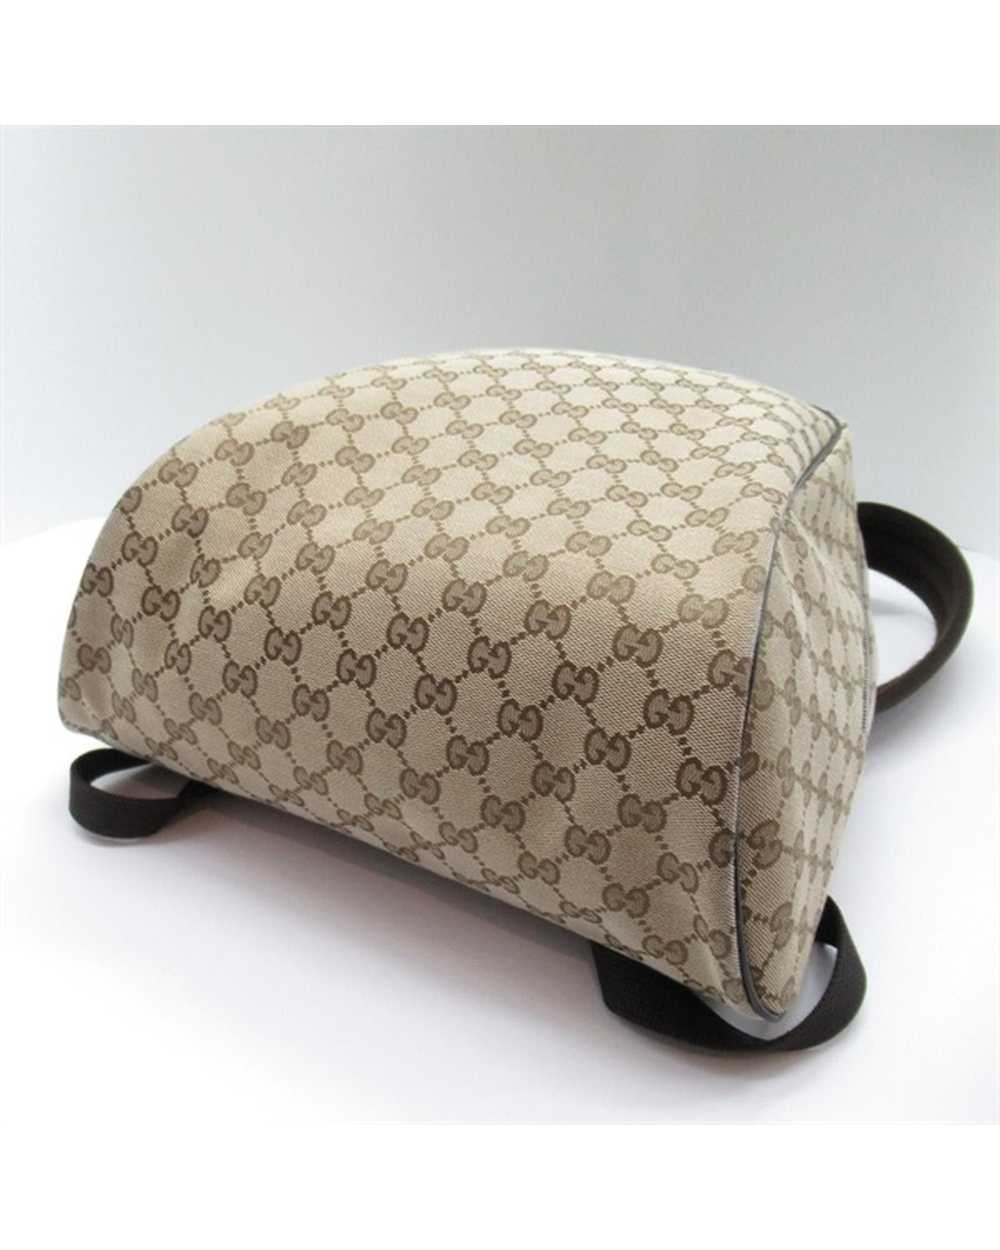 Gucci Canvas Backpack in Brown with GG Pattern - … - image 4